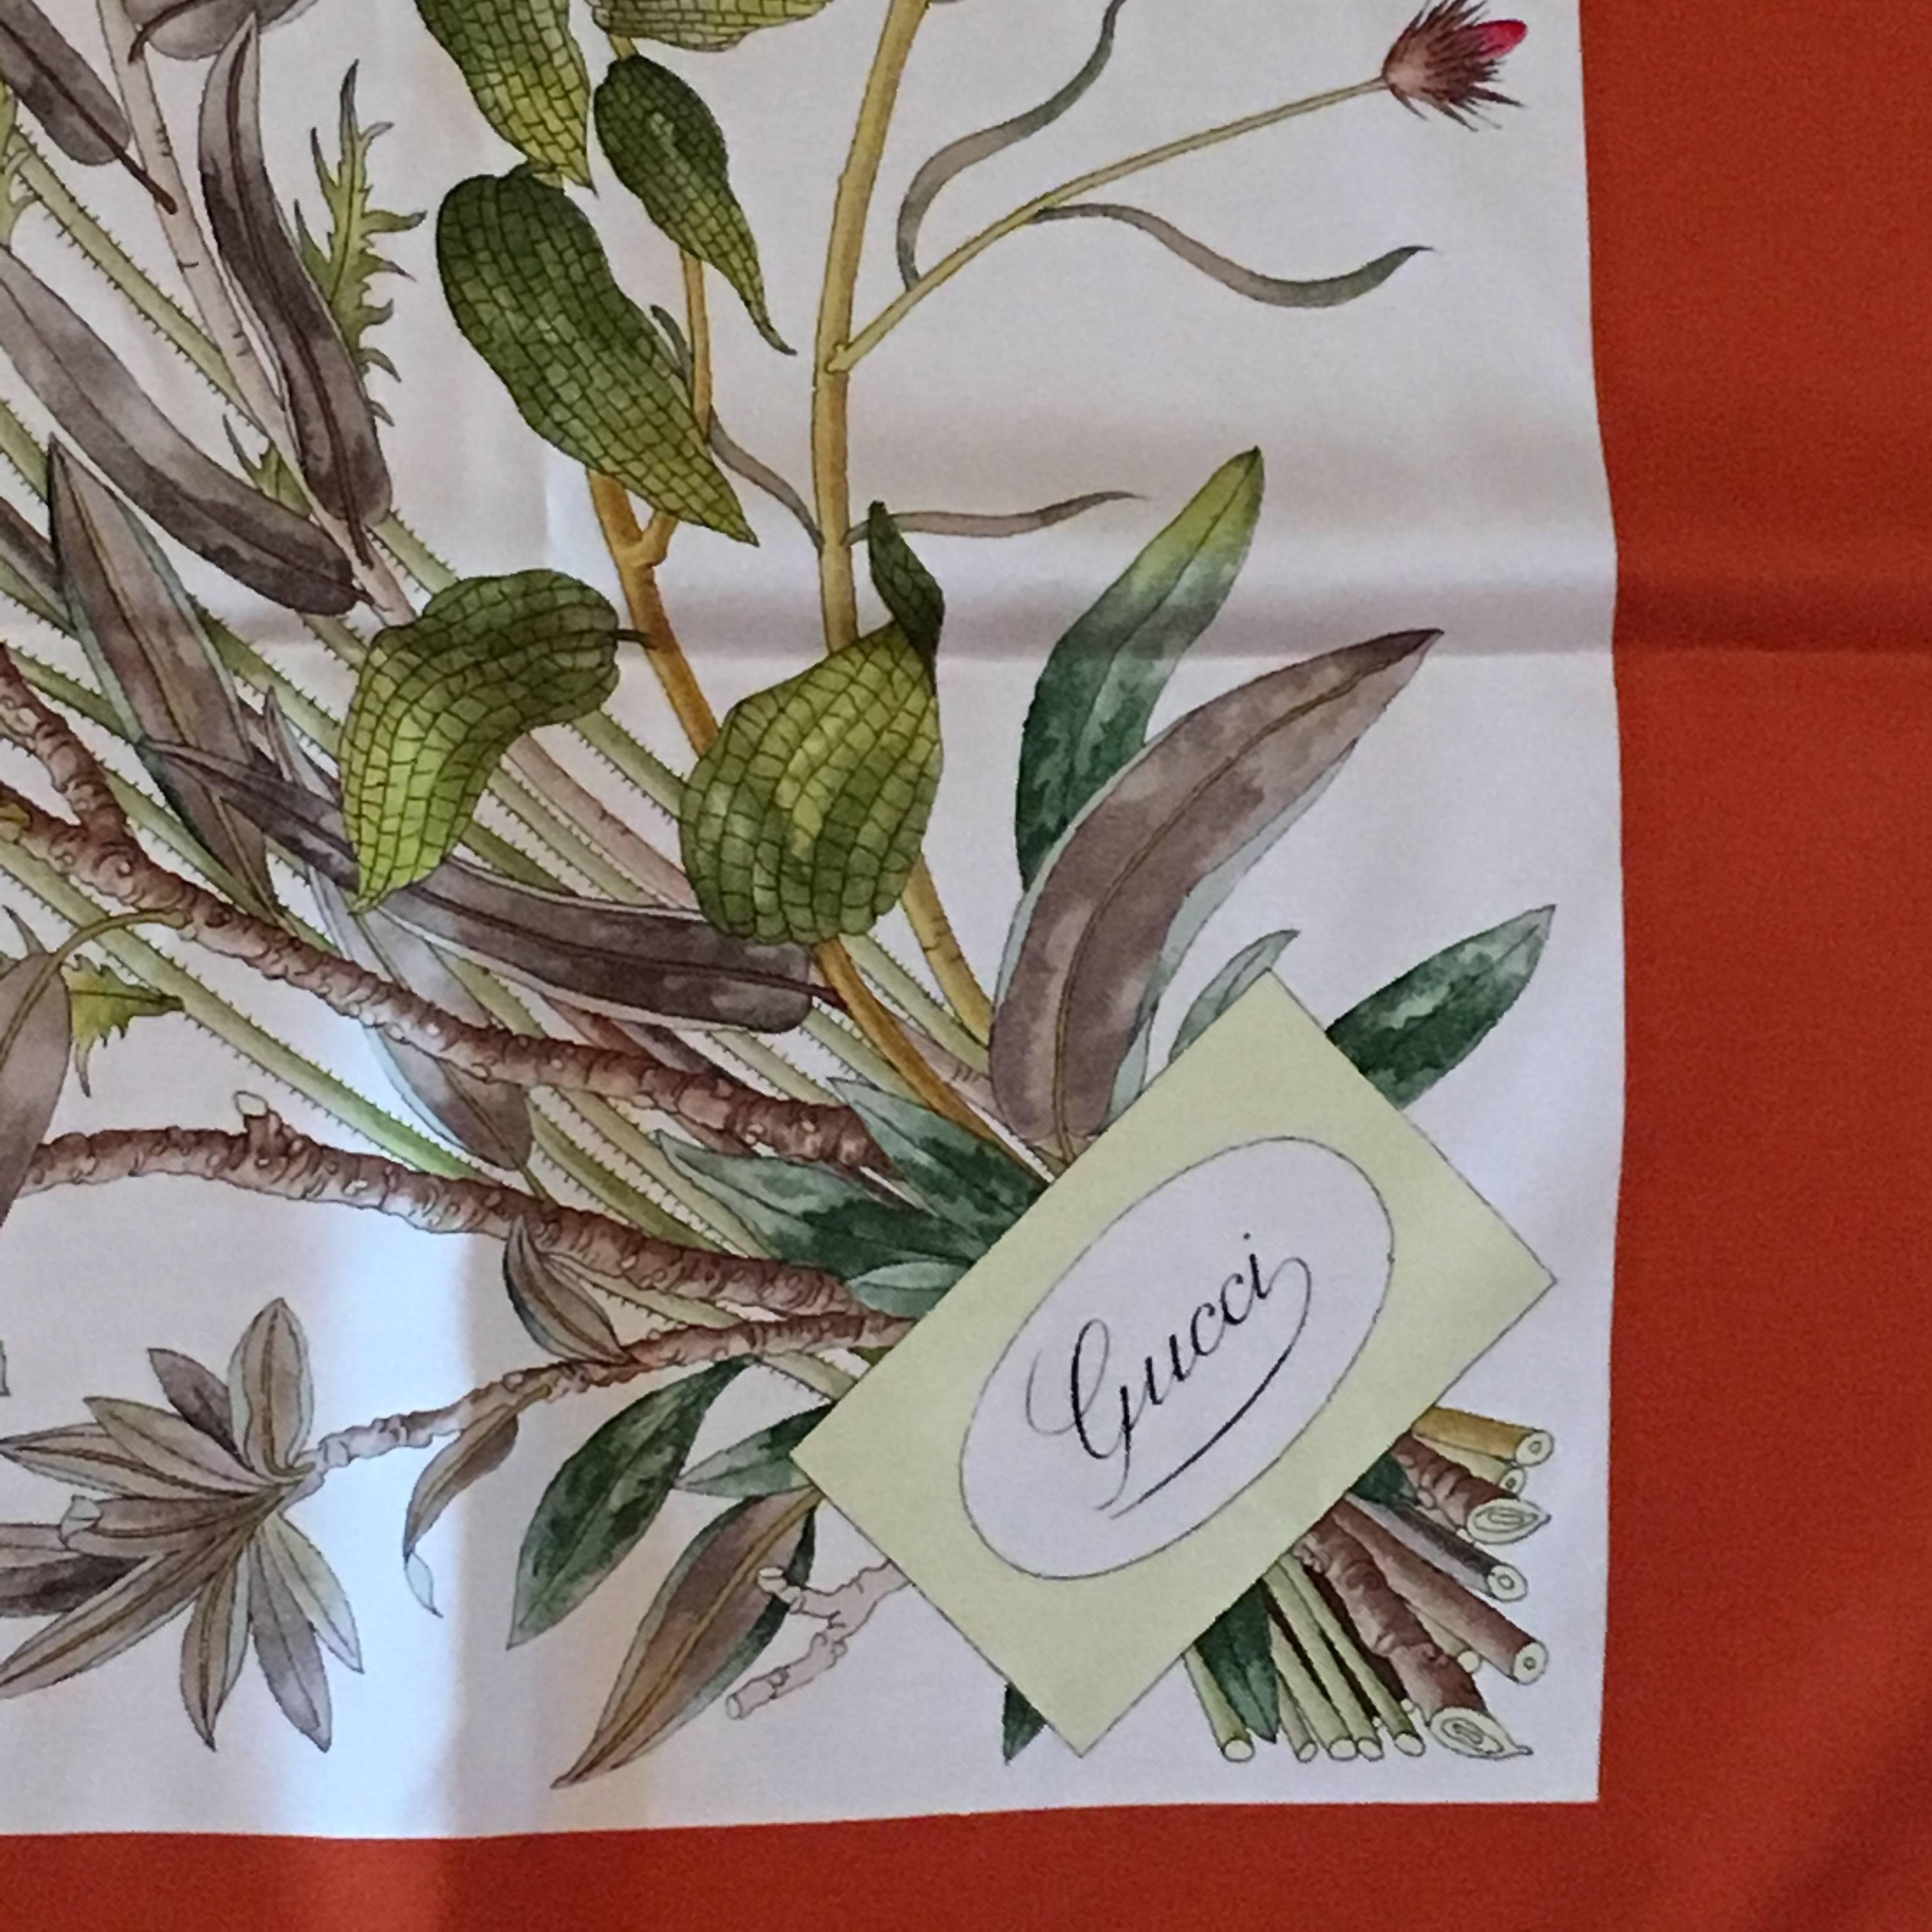 This 1970s silk scarf from Gucci features a hard to find Fall botanical floral print designed by Vittorio Accornero - the designer of the iconic Gucci 'Flora' print.  Accornero was a world renowned children’s book illustrator. The scarf measures